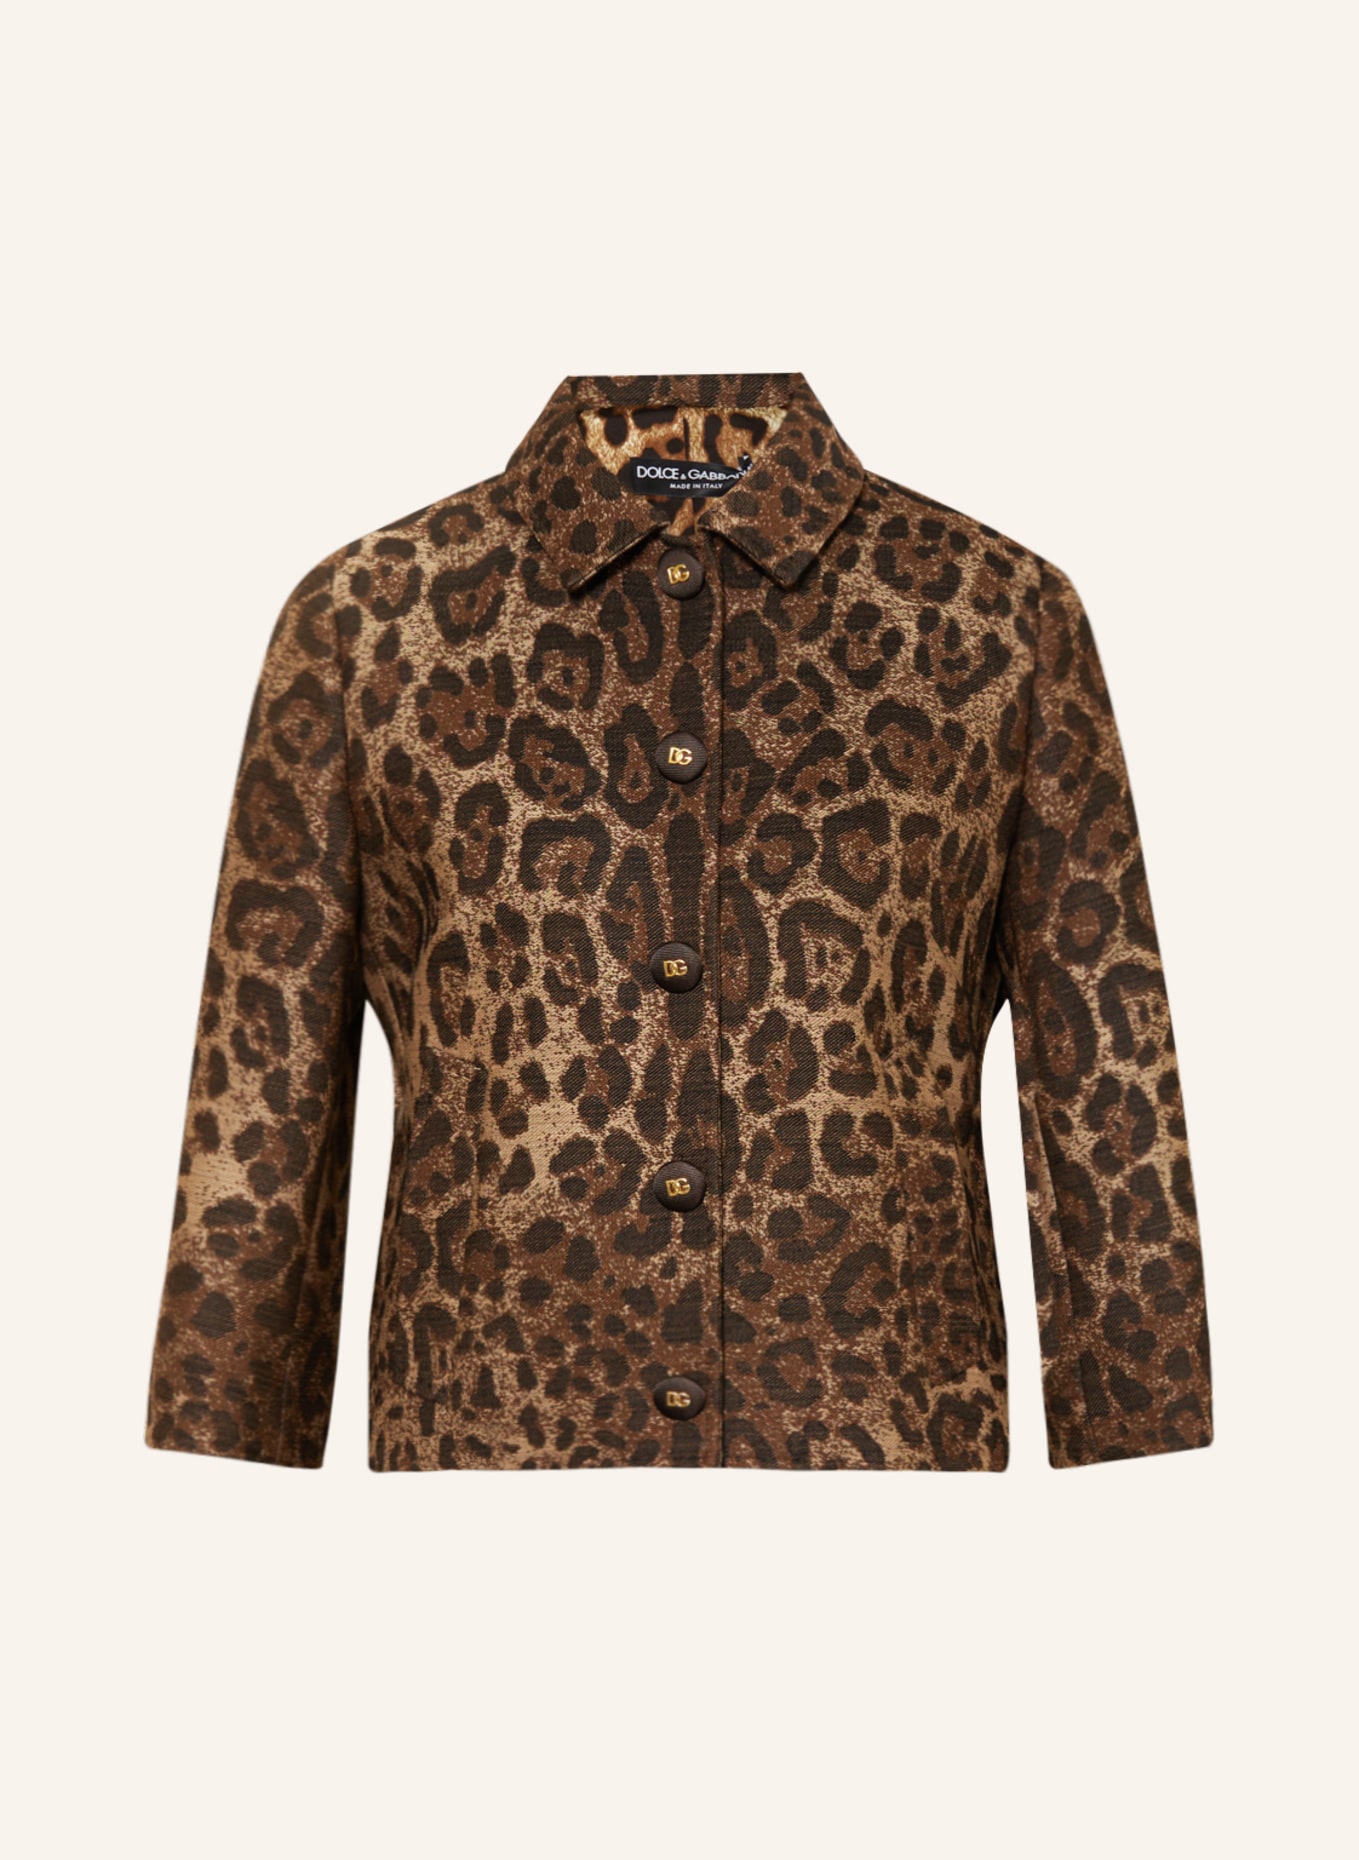 DOLCE & GABBANA Jacquard jacket with 3/4 sleeves, Color: BROWN/ DARK BROWN/ LIGHT BROWN (Image 1)